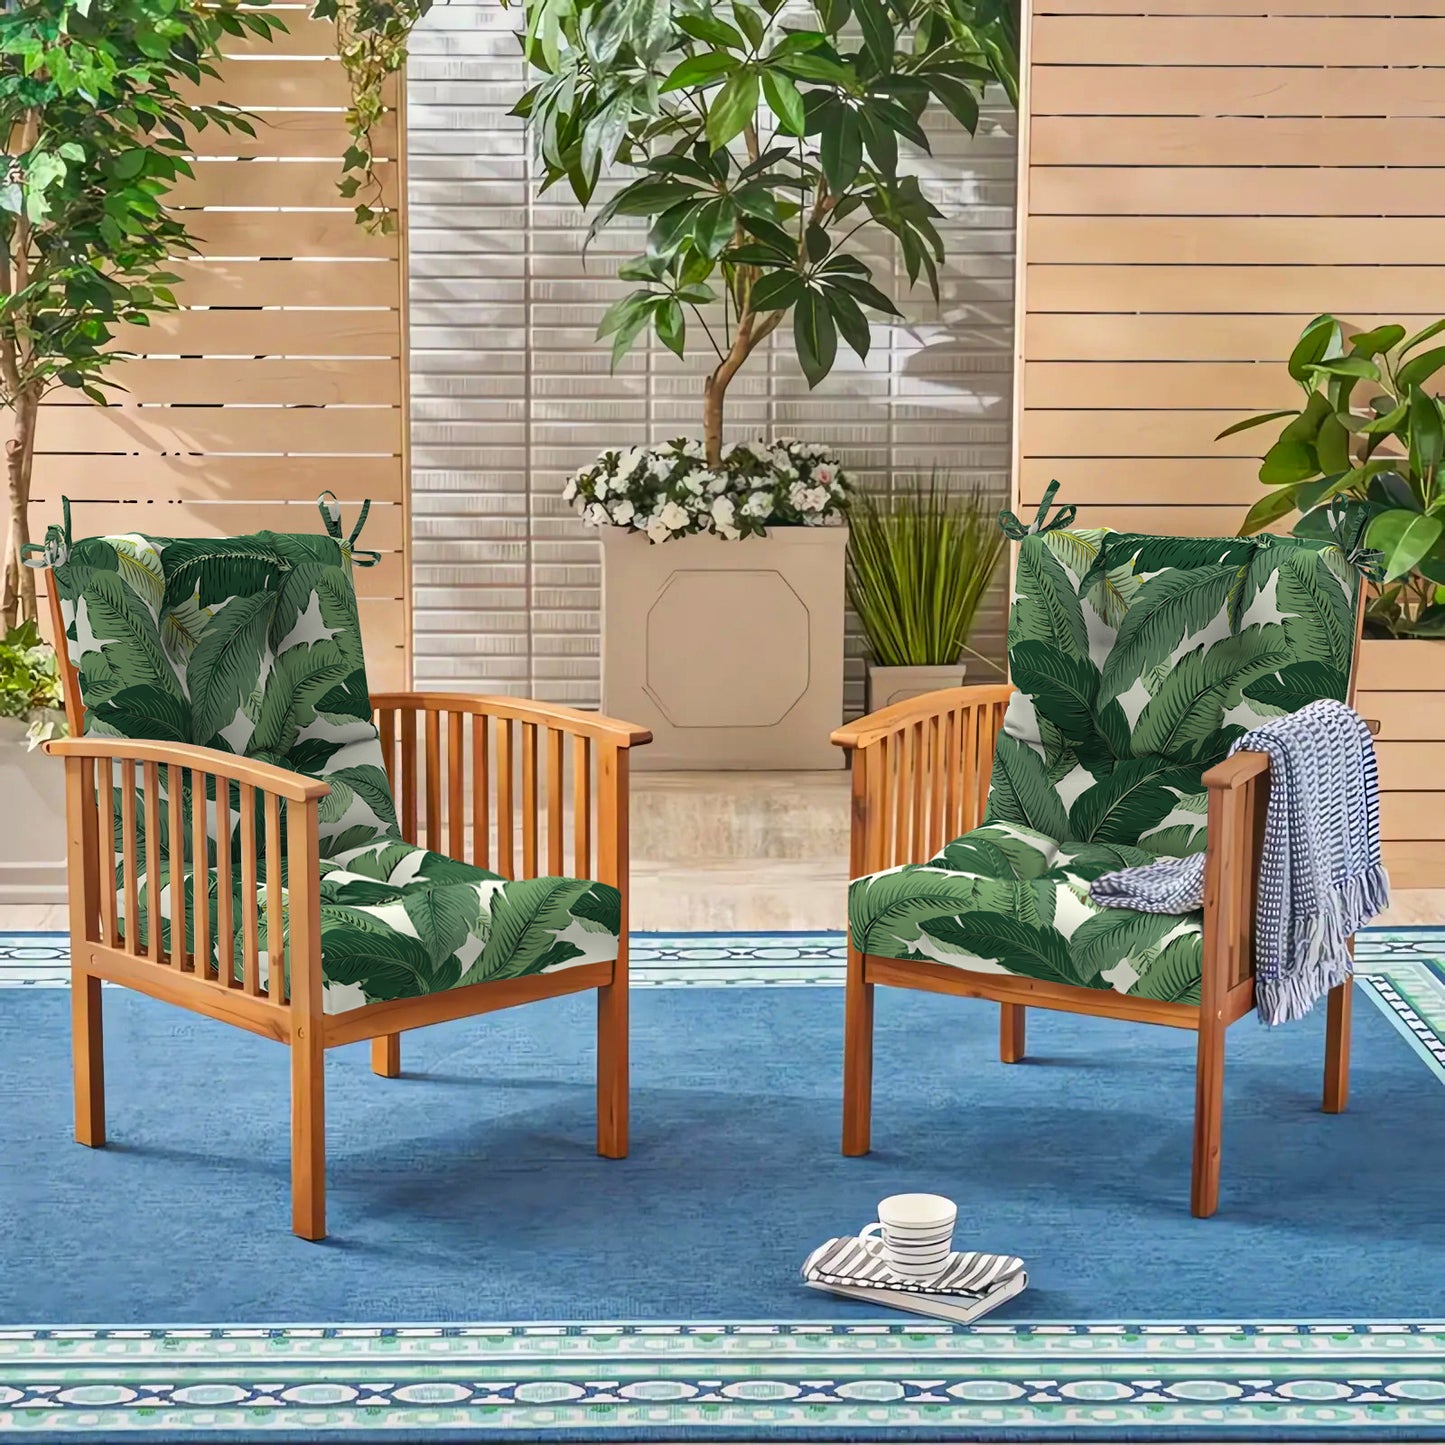 Melody Elephant Indoor/Outdoor Square Tufted Seat Cushions with Ties, Fade Resistant Patio Wicker Thick Chair Pads Pack of 2, 19 x 19 x 5 Inch, Swaying Palms